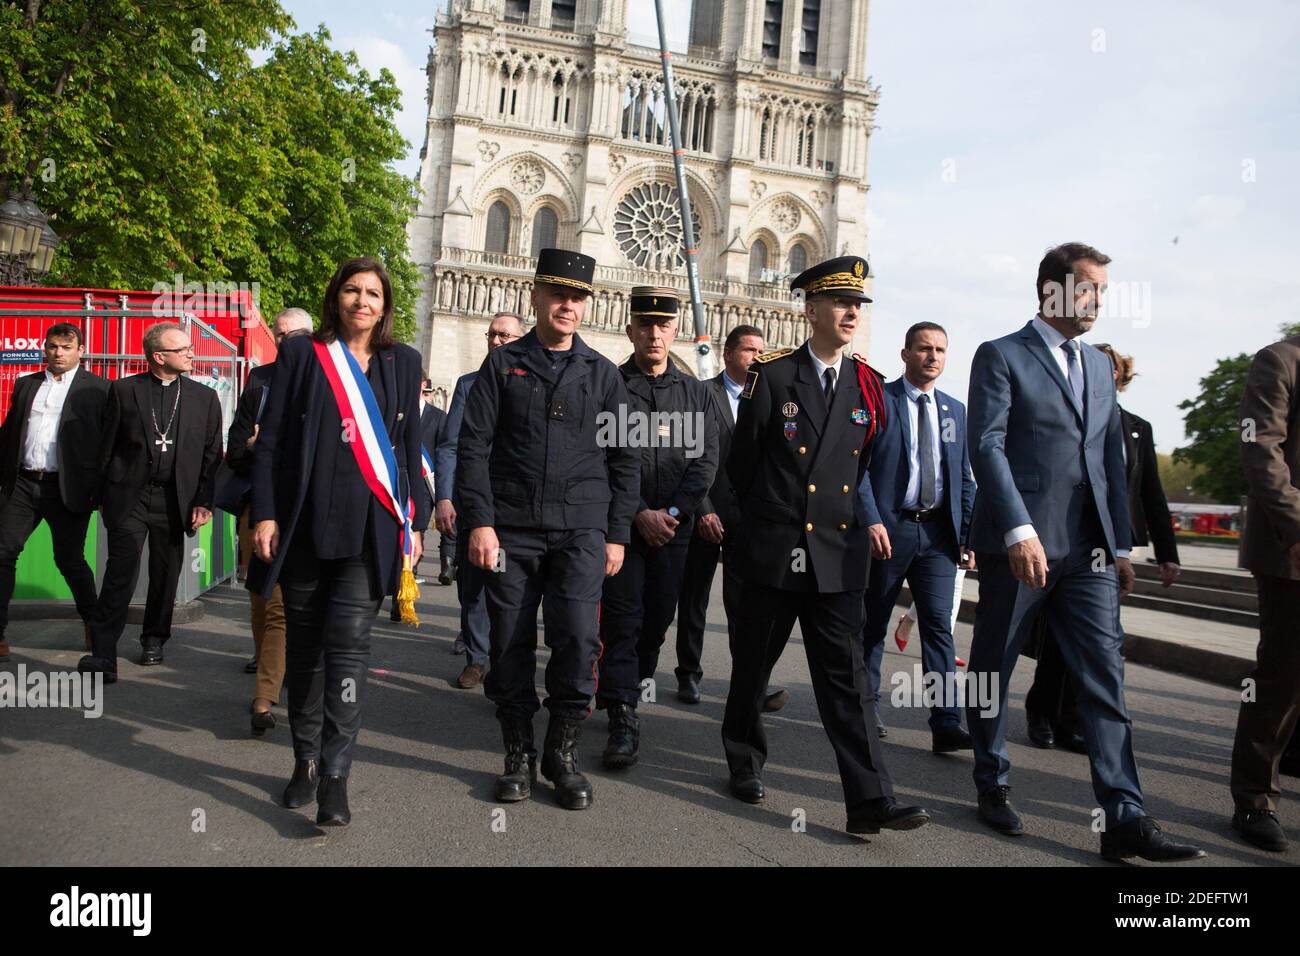 French Interior Minister Christophe Castaner (R), Paris prefect Didier Lallement (2R), Paris mayor Anne Hidalgo (L), and other officials walk by Notre Dame cathedral on April 18, 2019 in Paris. France paid a daylong tribute on April 18, 2019 to the Paris firefighters who saved Notre Dame Cathedral from collapse, while construction workers rushed to secure an area above one of the church's famed rose-shaped windows and other vulnerable sections of the fire-damaged landmark. Photo by Raphael Lafargue/ABACAPRESS.COM Stock Photo